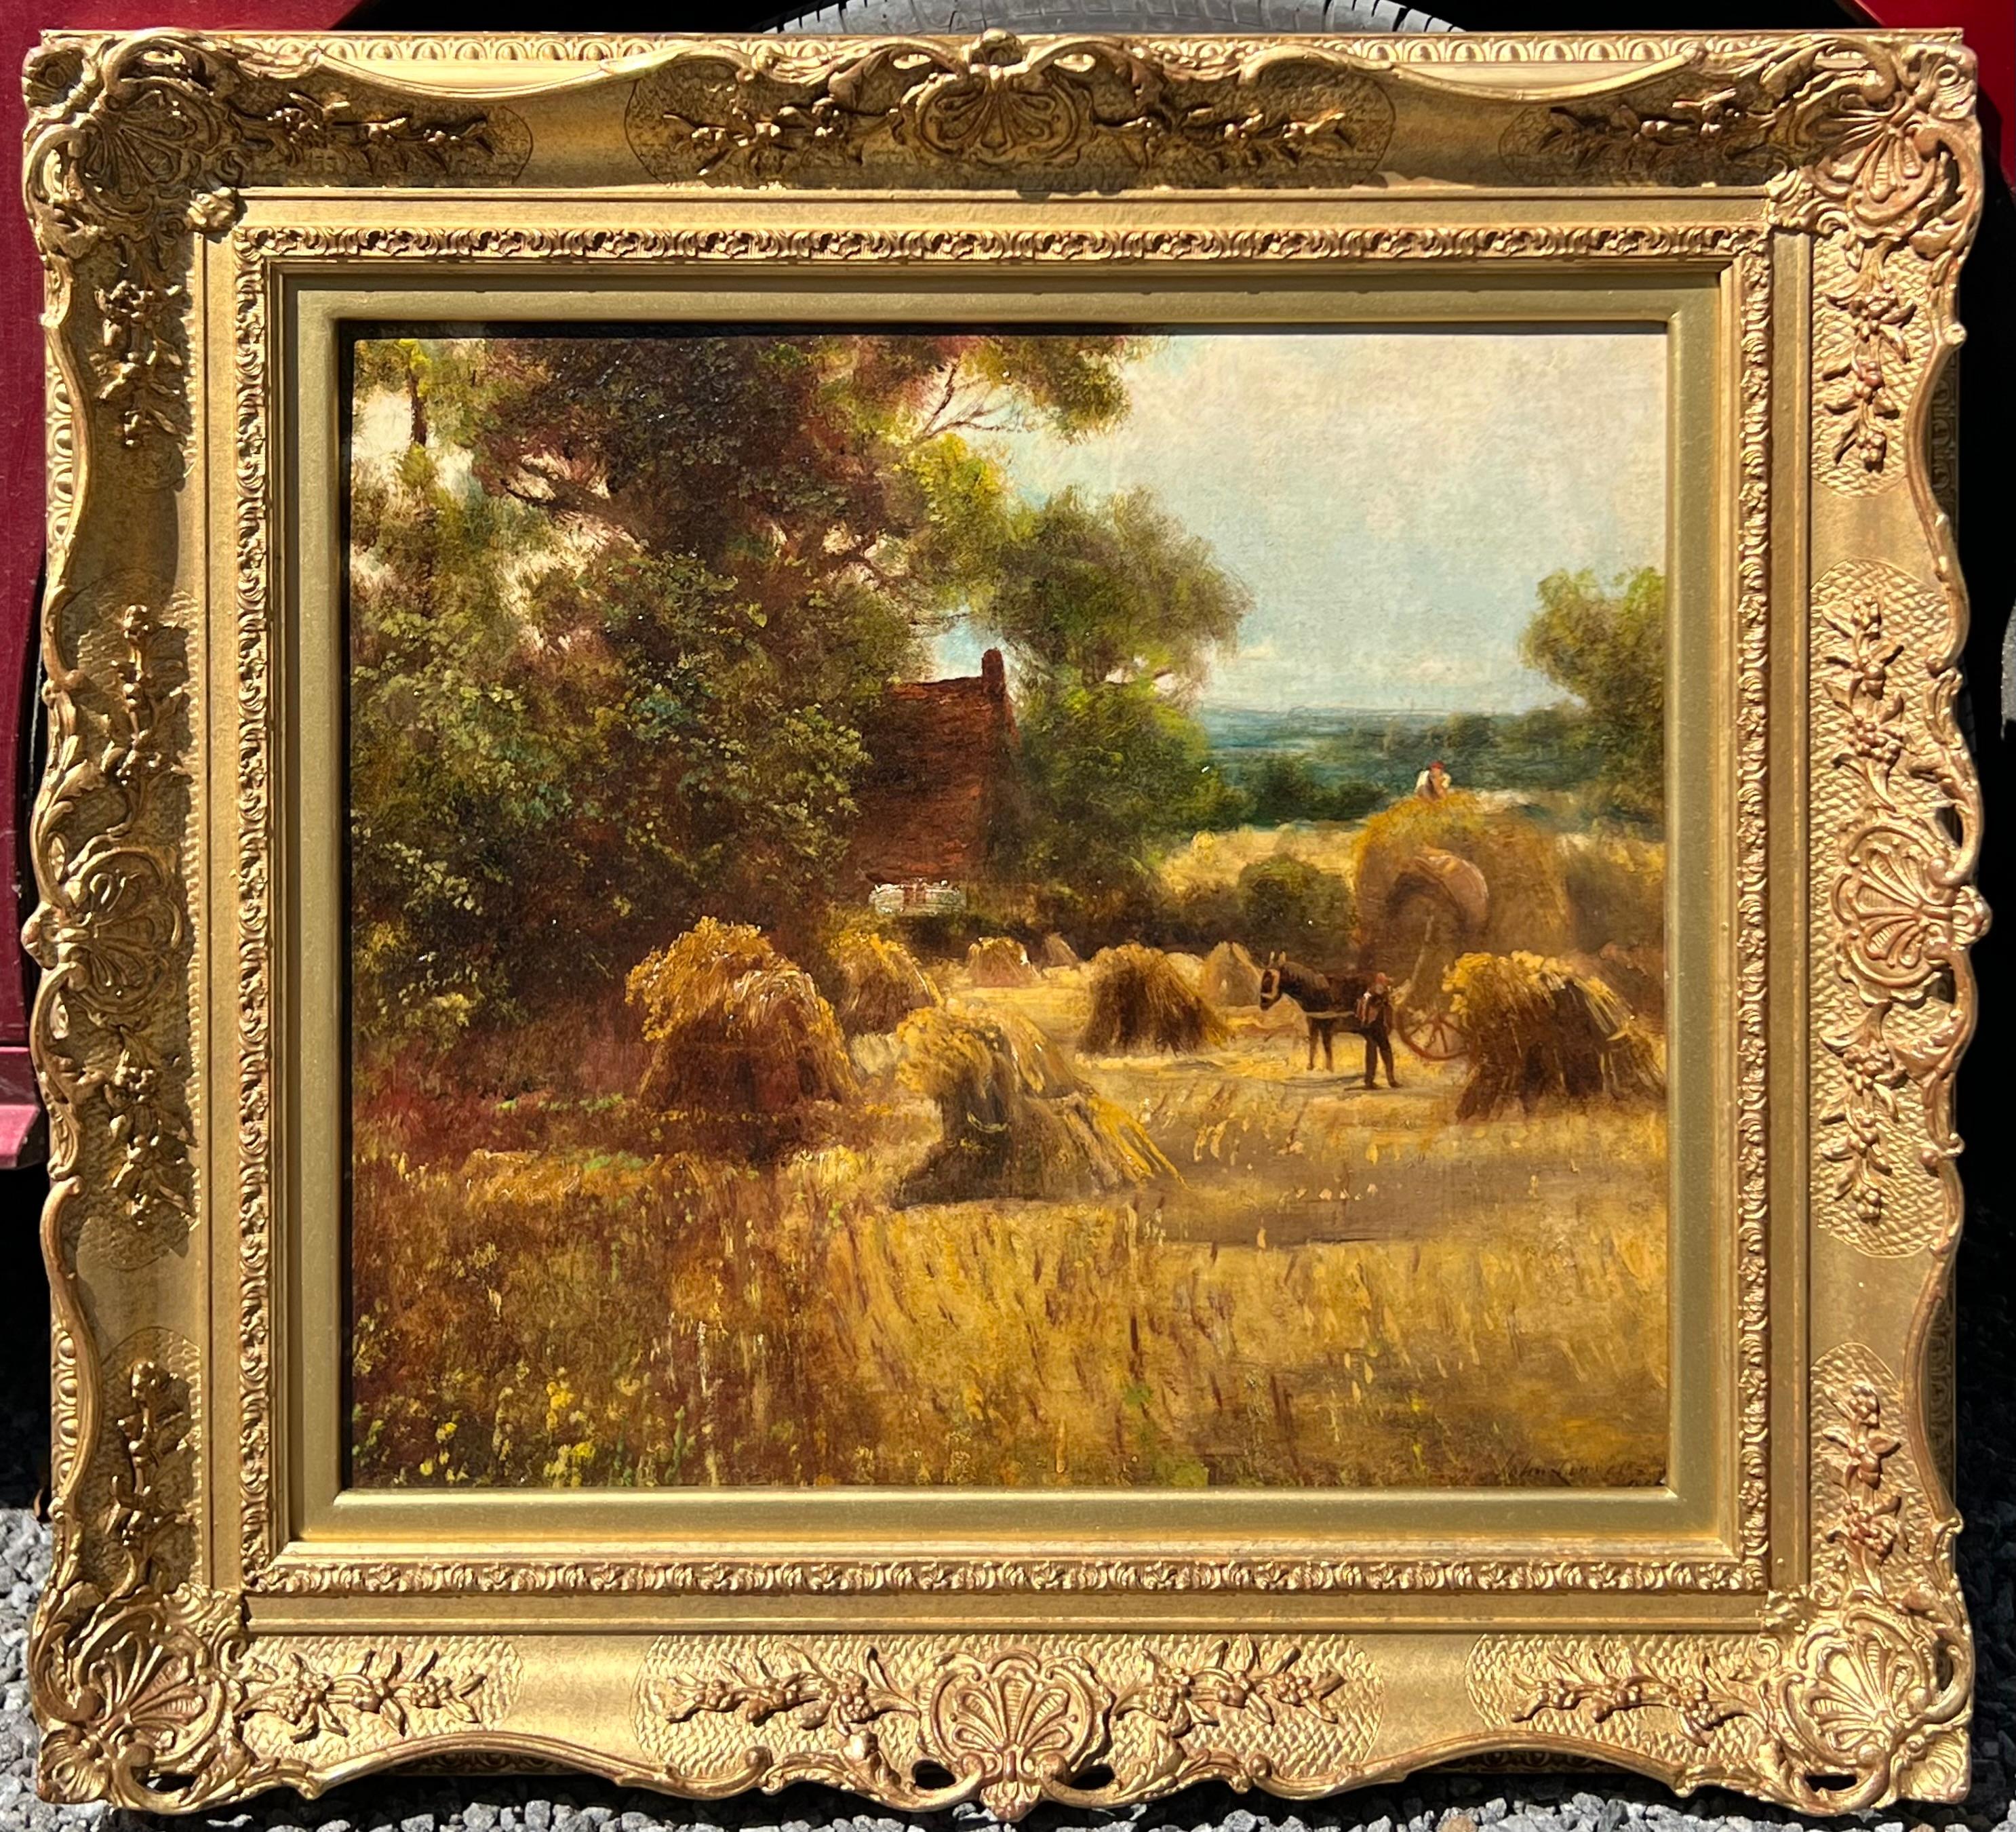 Baling the Hay - Painting by John Linnell (b.1792)